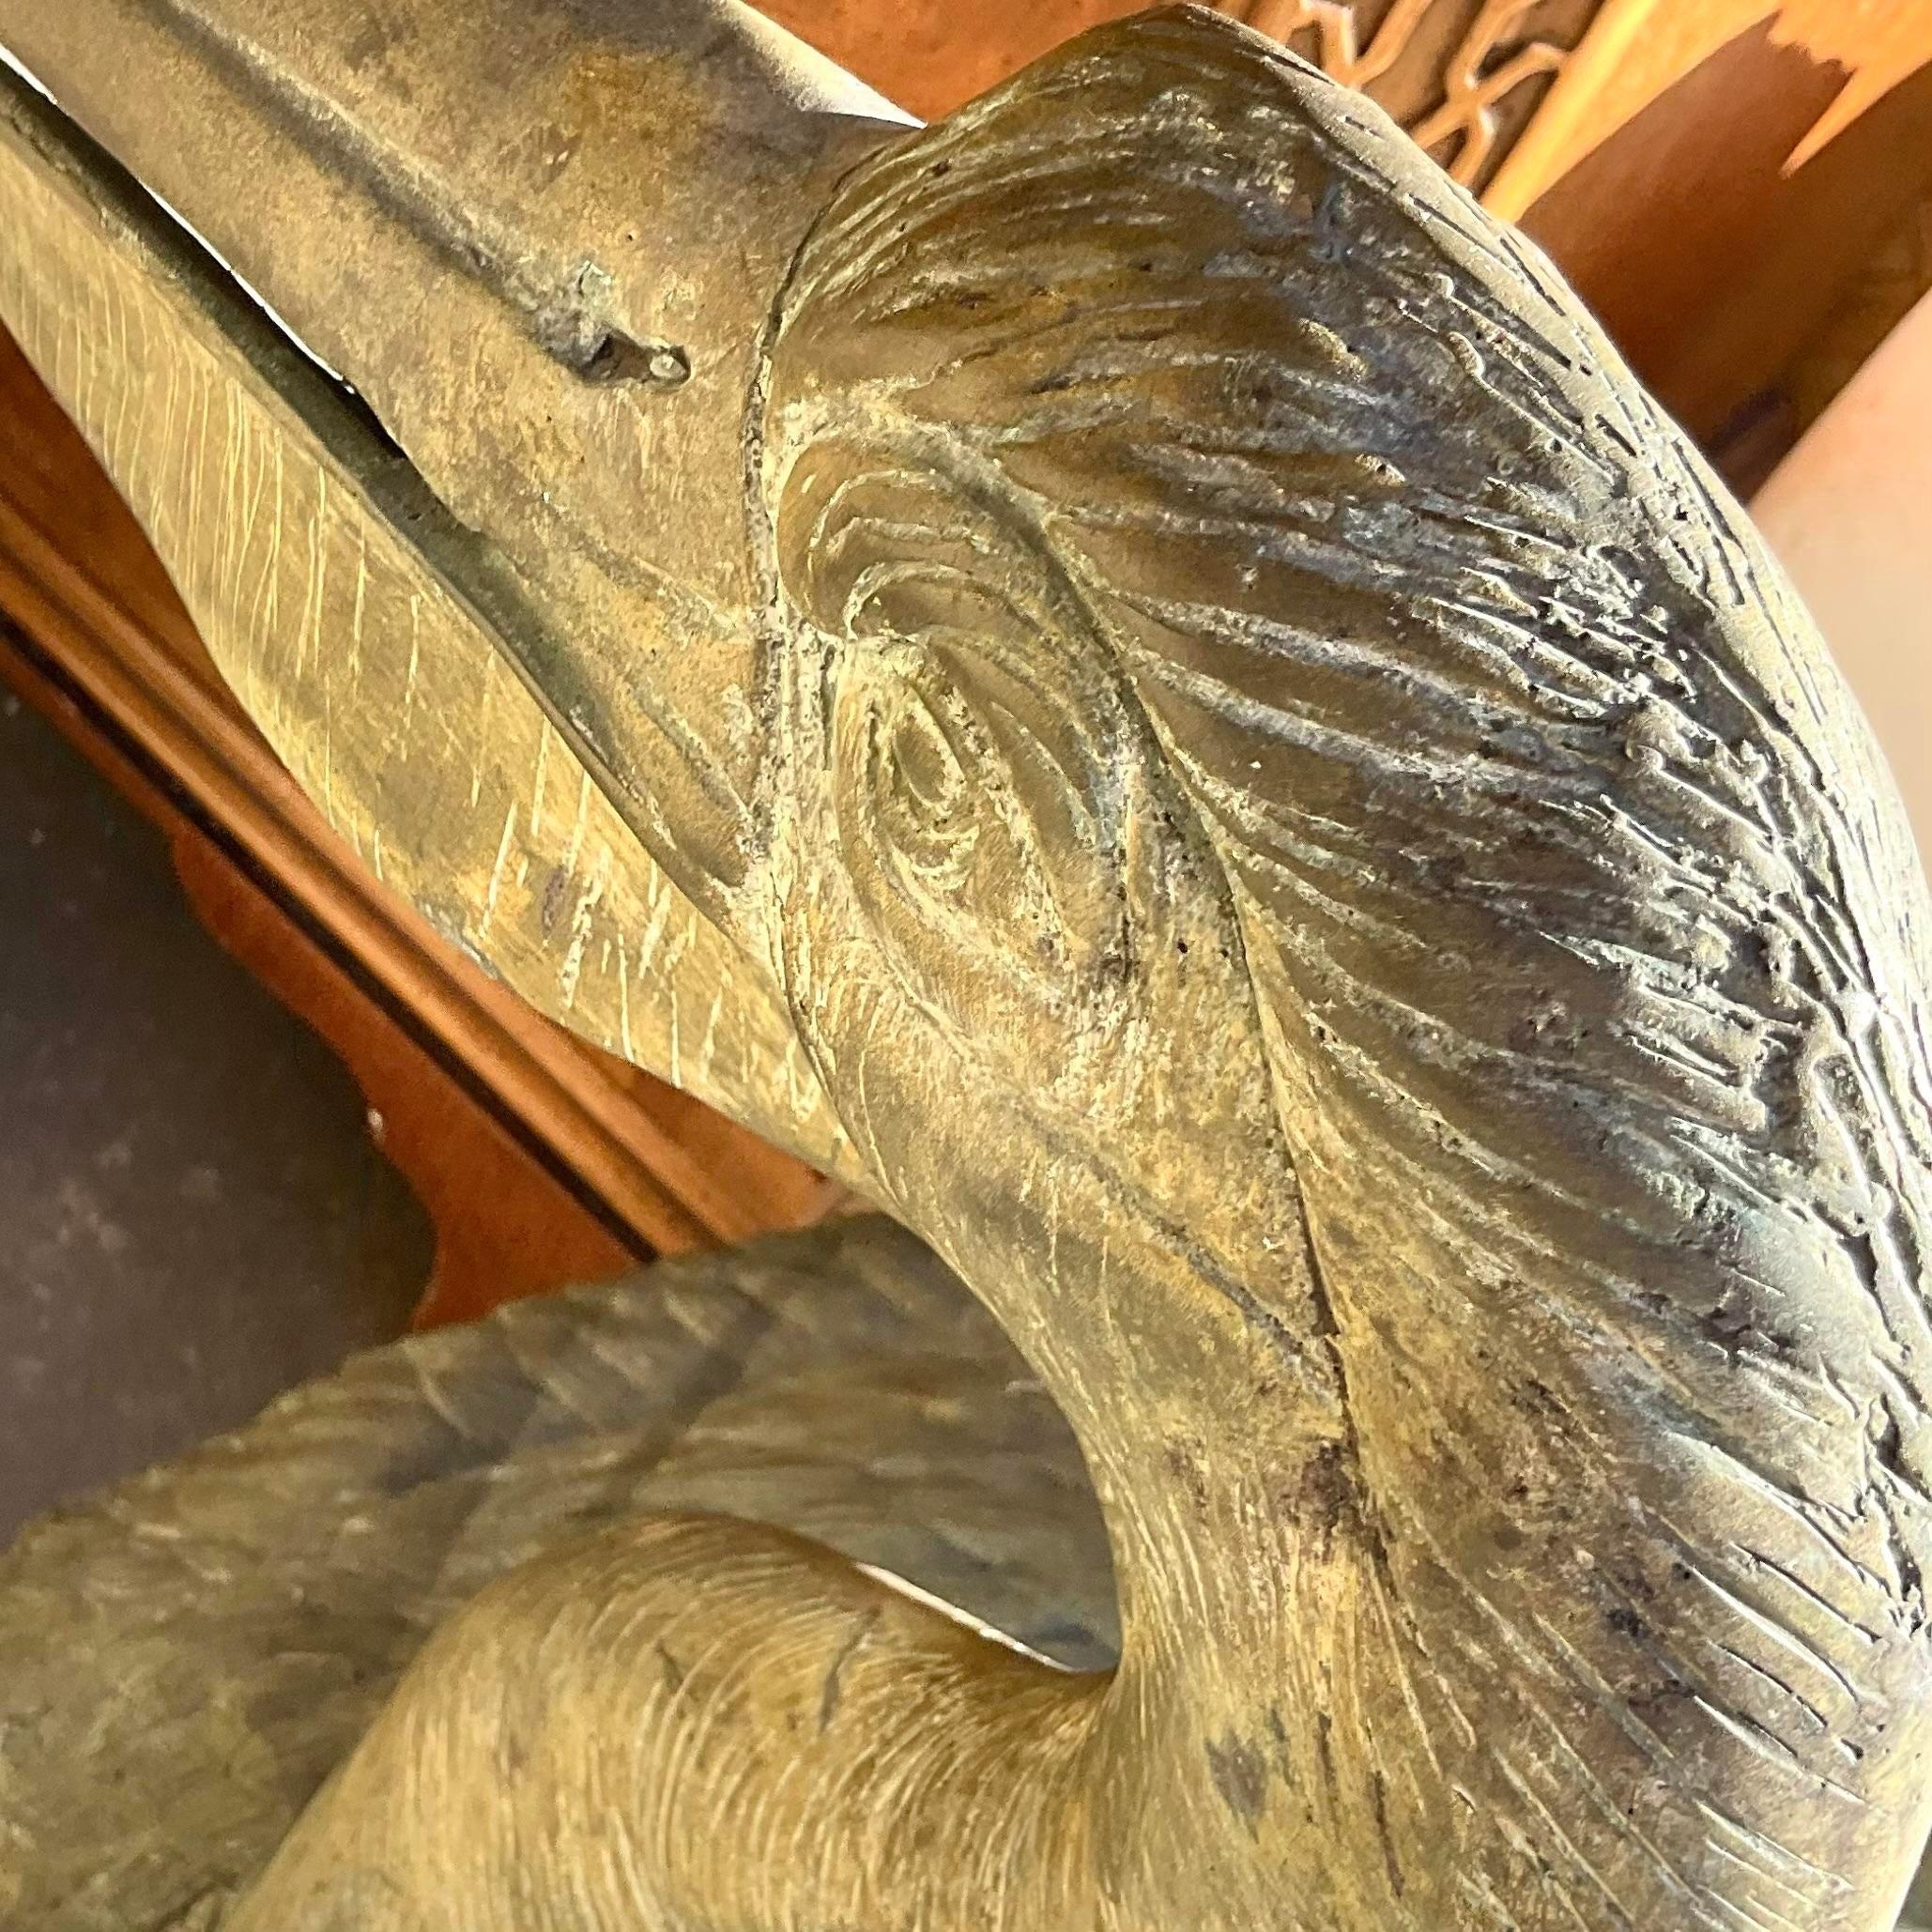 A stunning set of two vintage Coastal pelicans. Chic life size birds with incredible attention to detail. A beautiful all over patina from time. Acquired from a Palm Beach estate.

Lower pelican 20.5x9.5x23.5